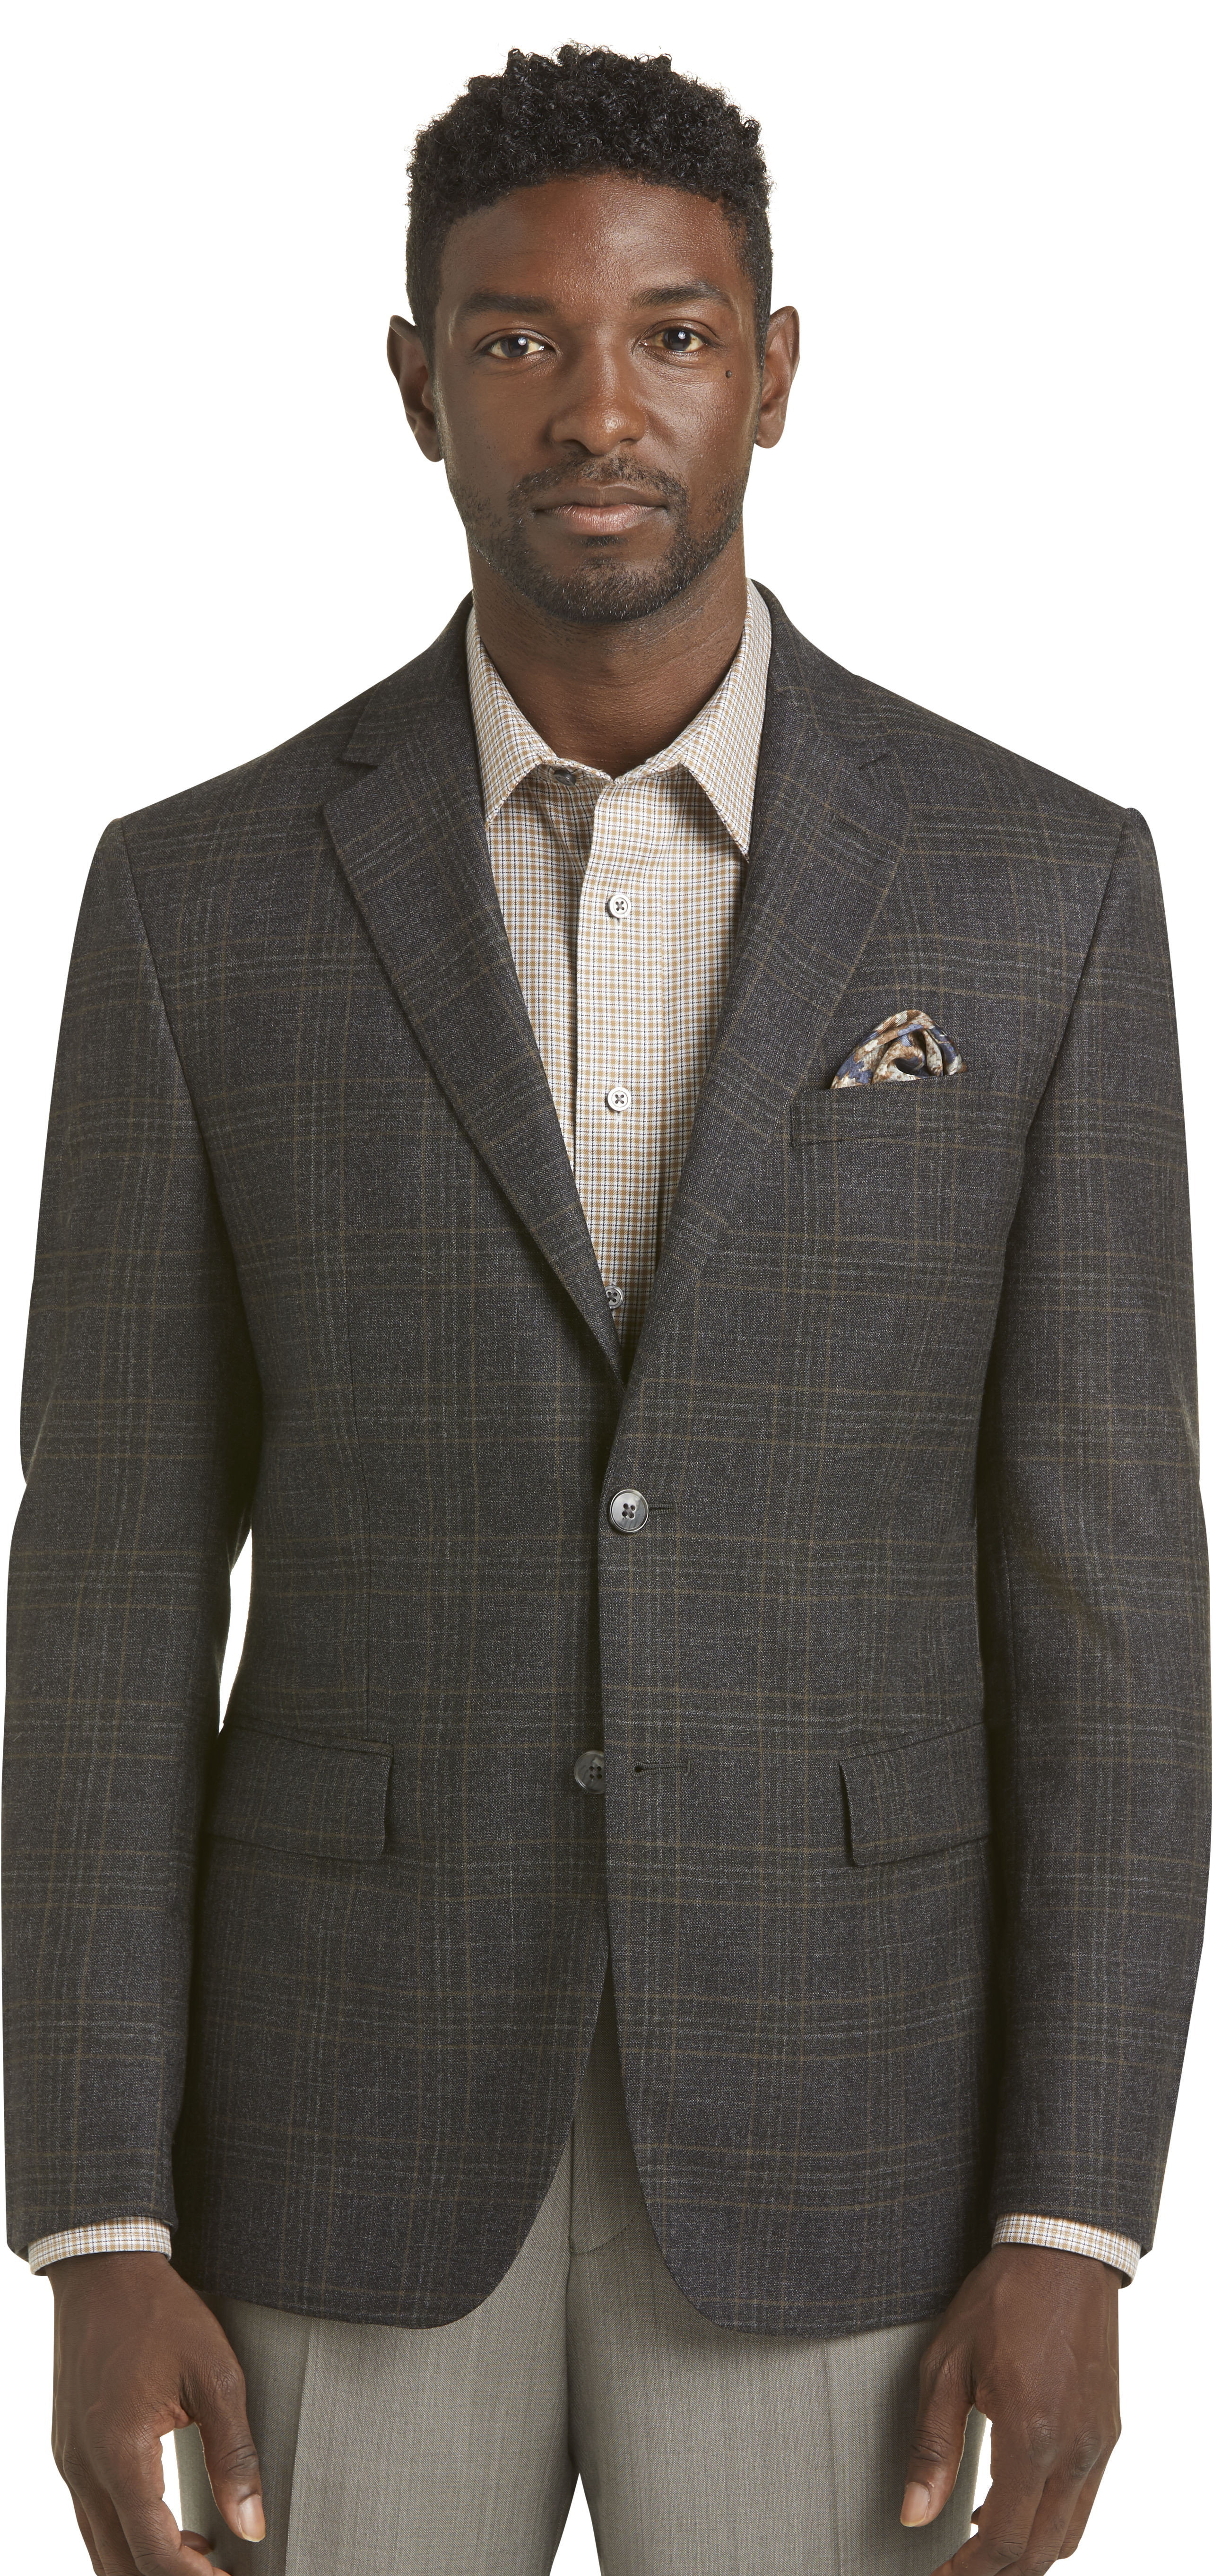 Traveler Collection Tailored Fit Windowpane Plaid Sportcoat